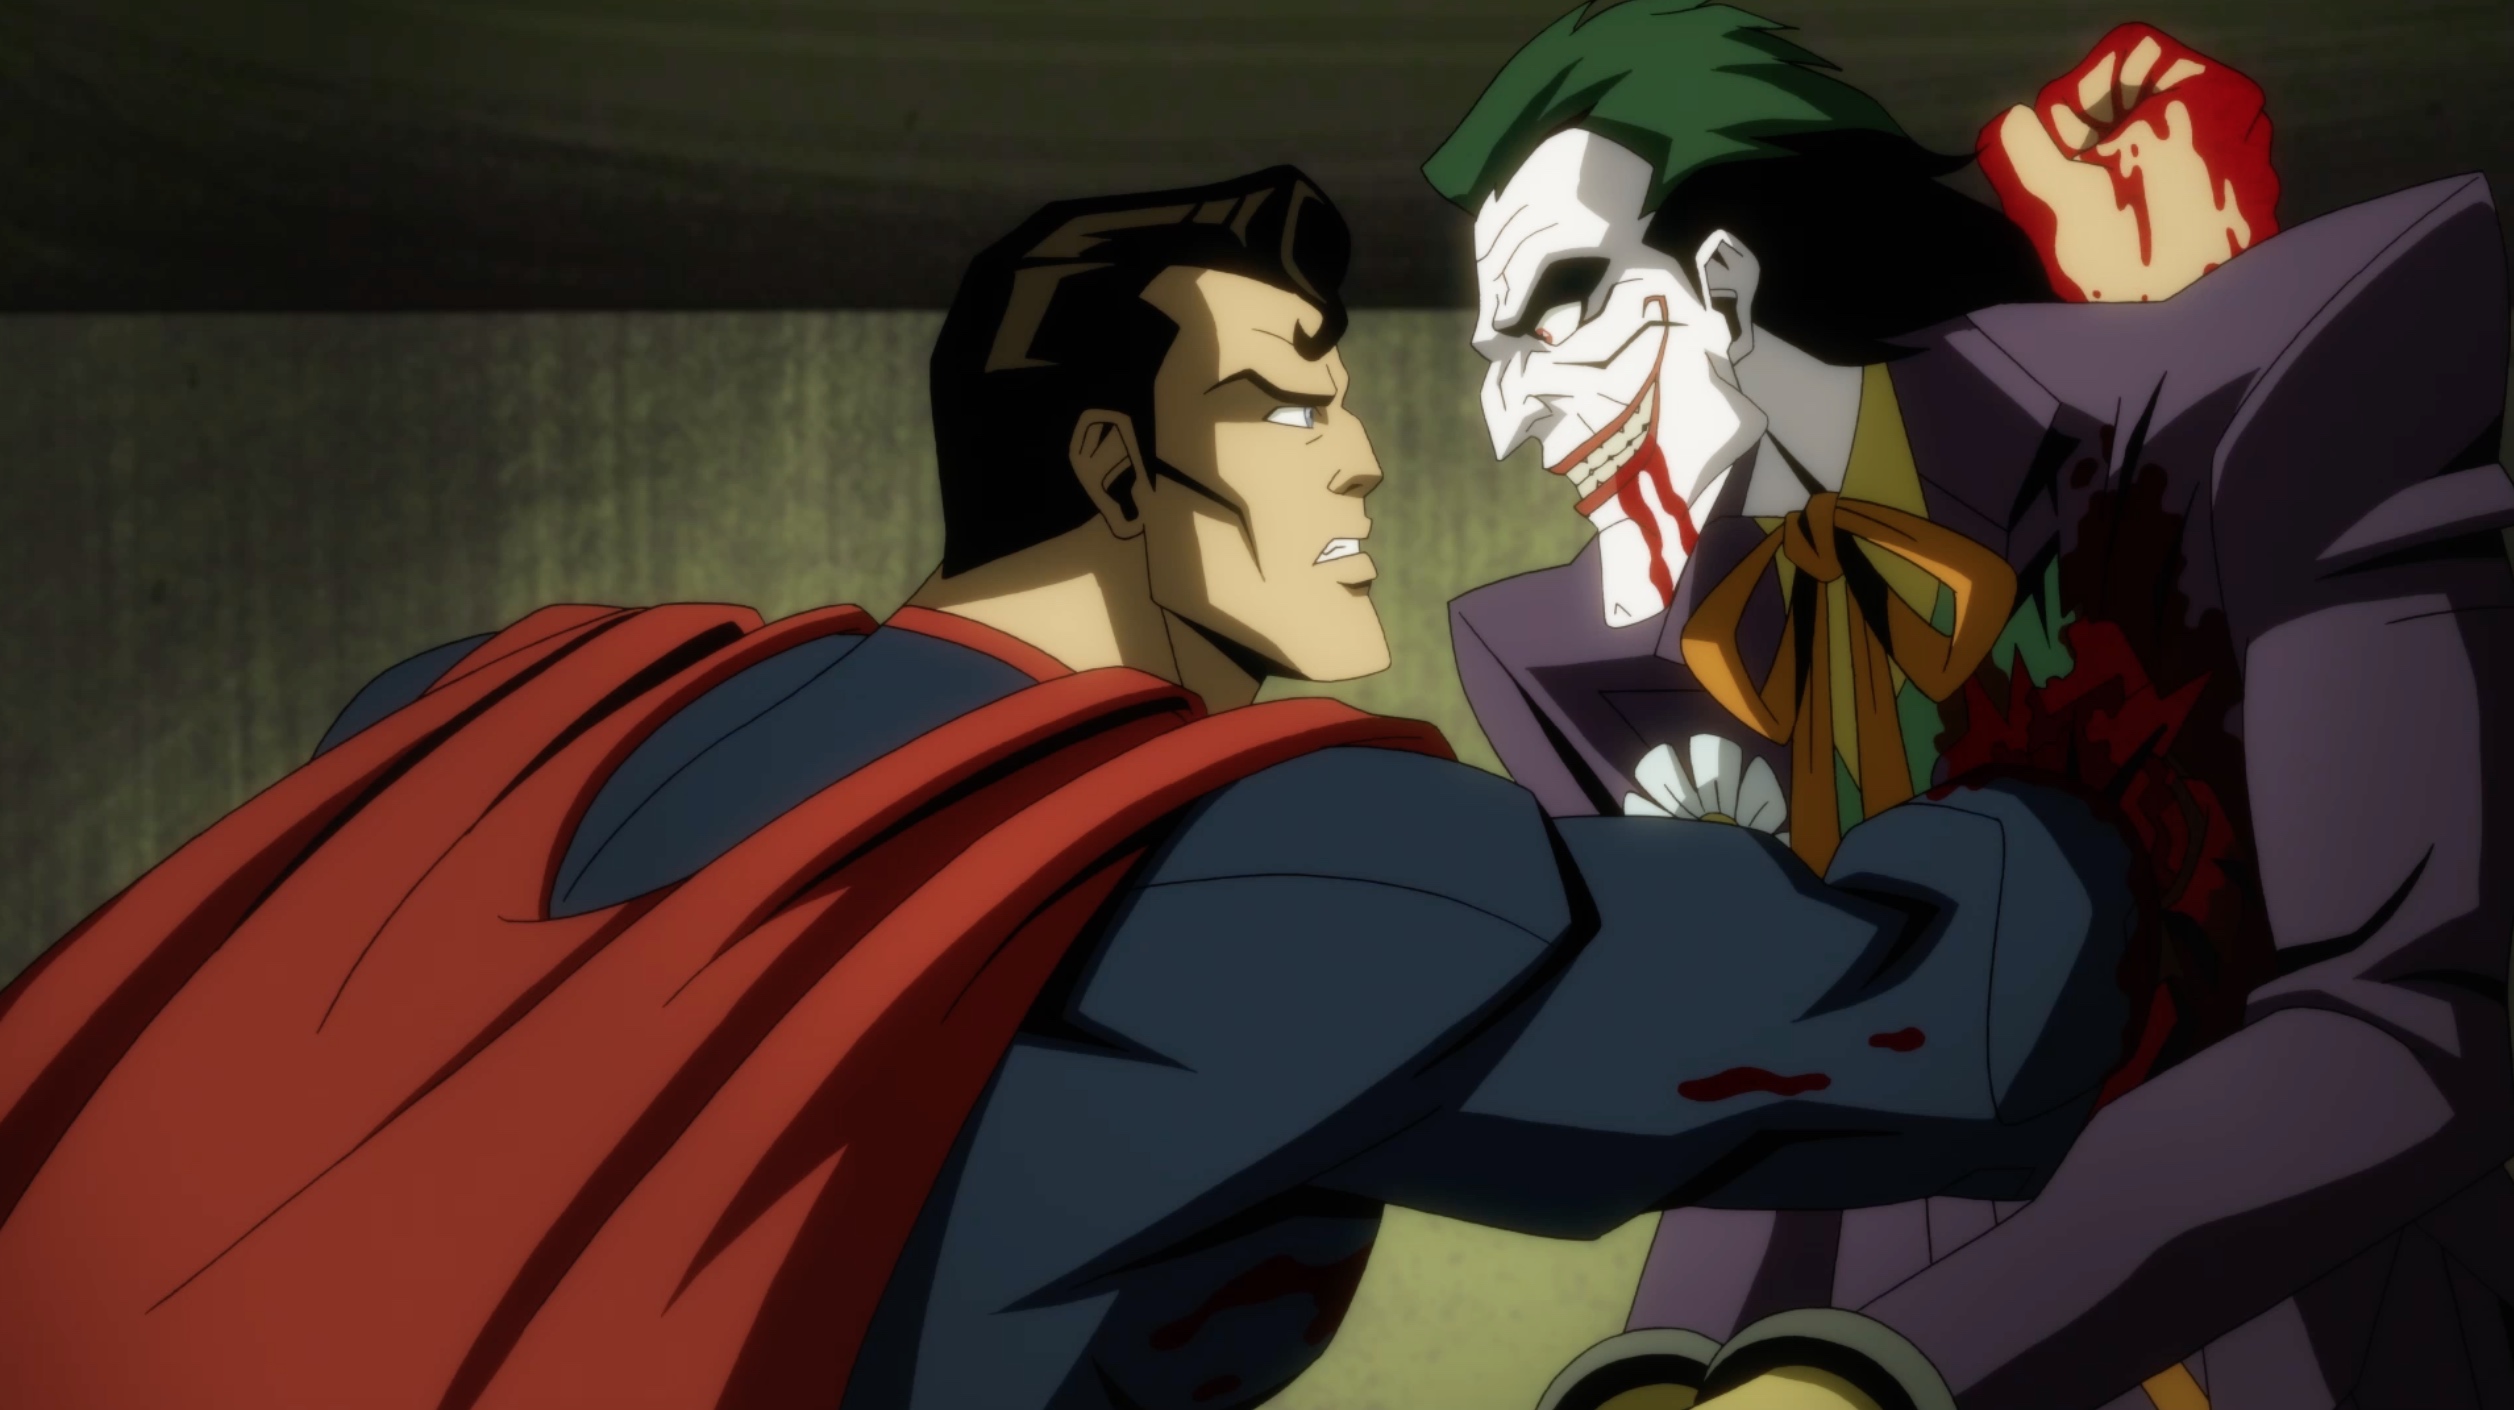 New Injustice Red Band Trailer Pulls No Punches